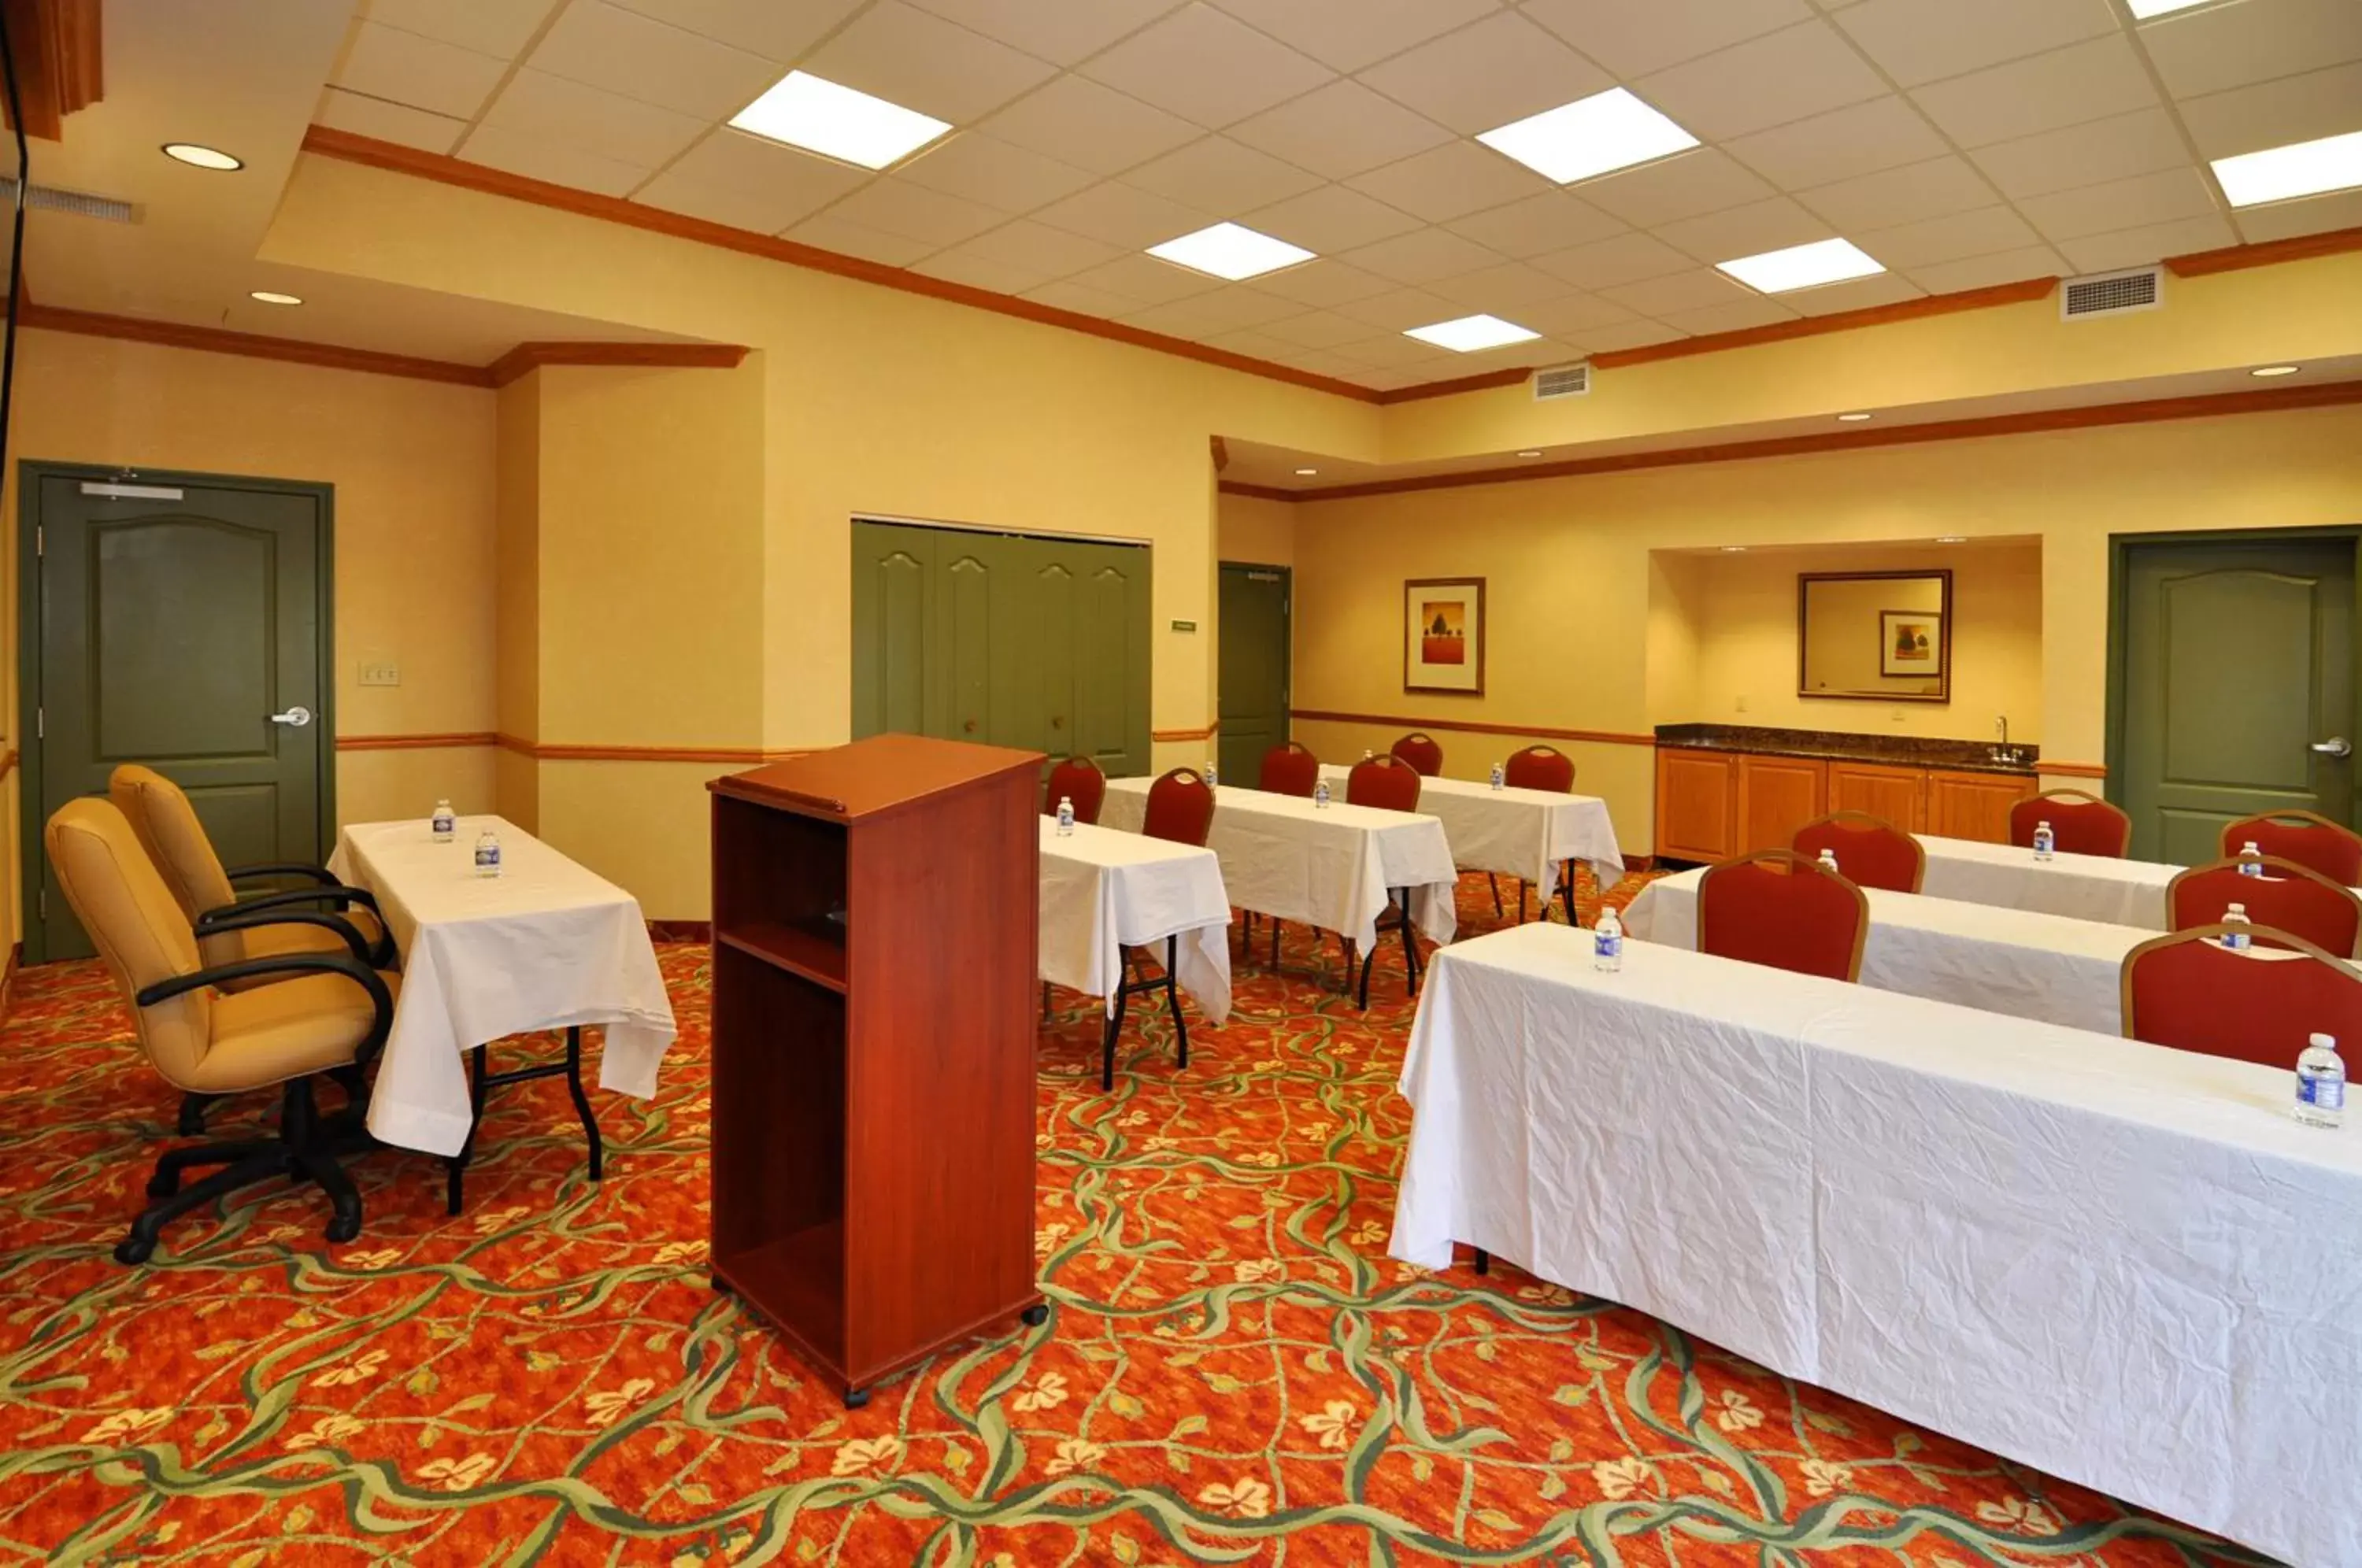 Banquet/Function facilities in Country Inn & Suites by Radisson, Pensacola West, FL